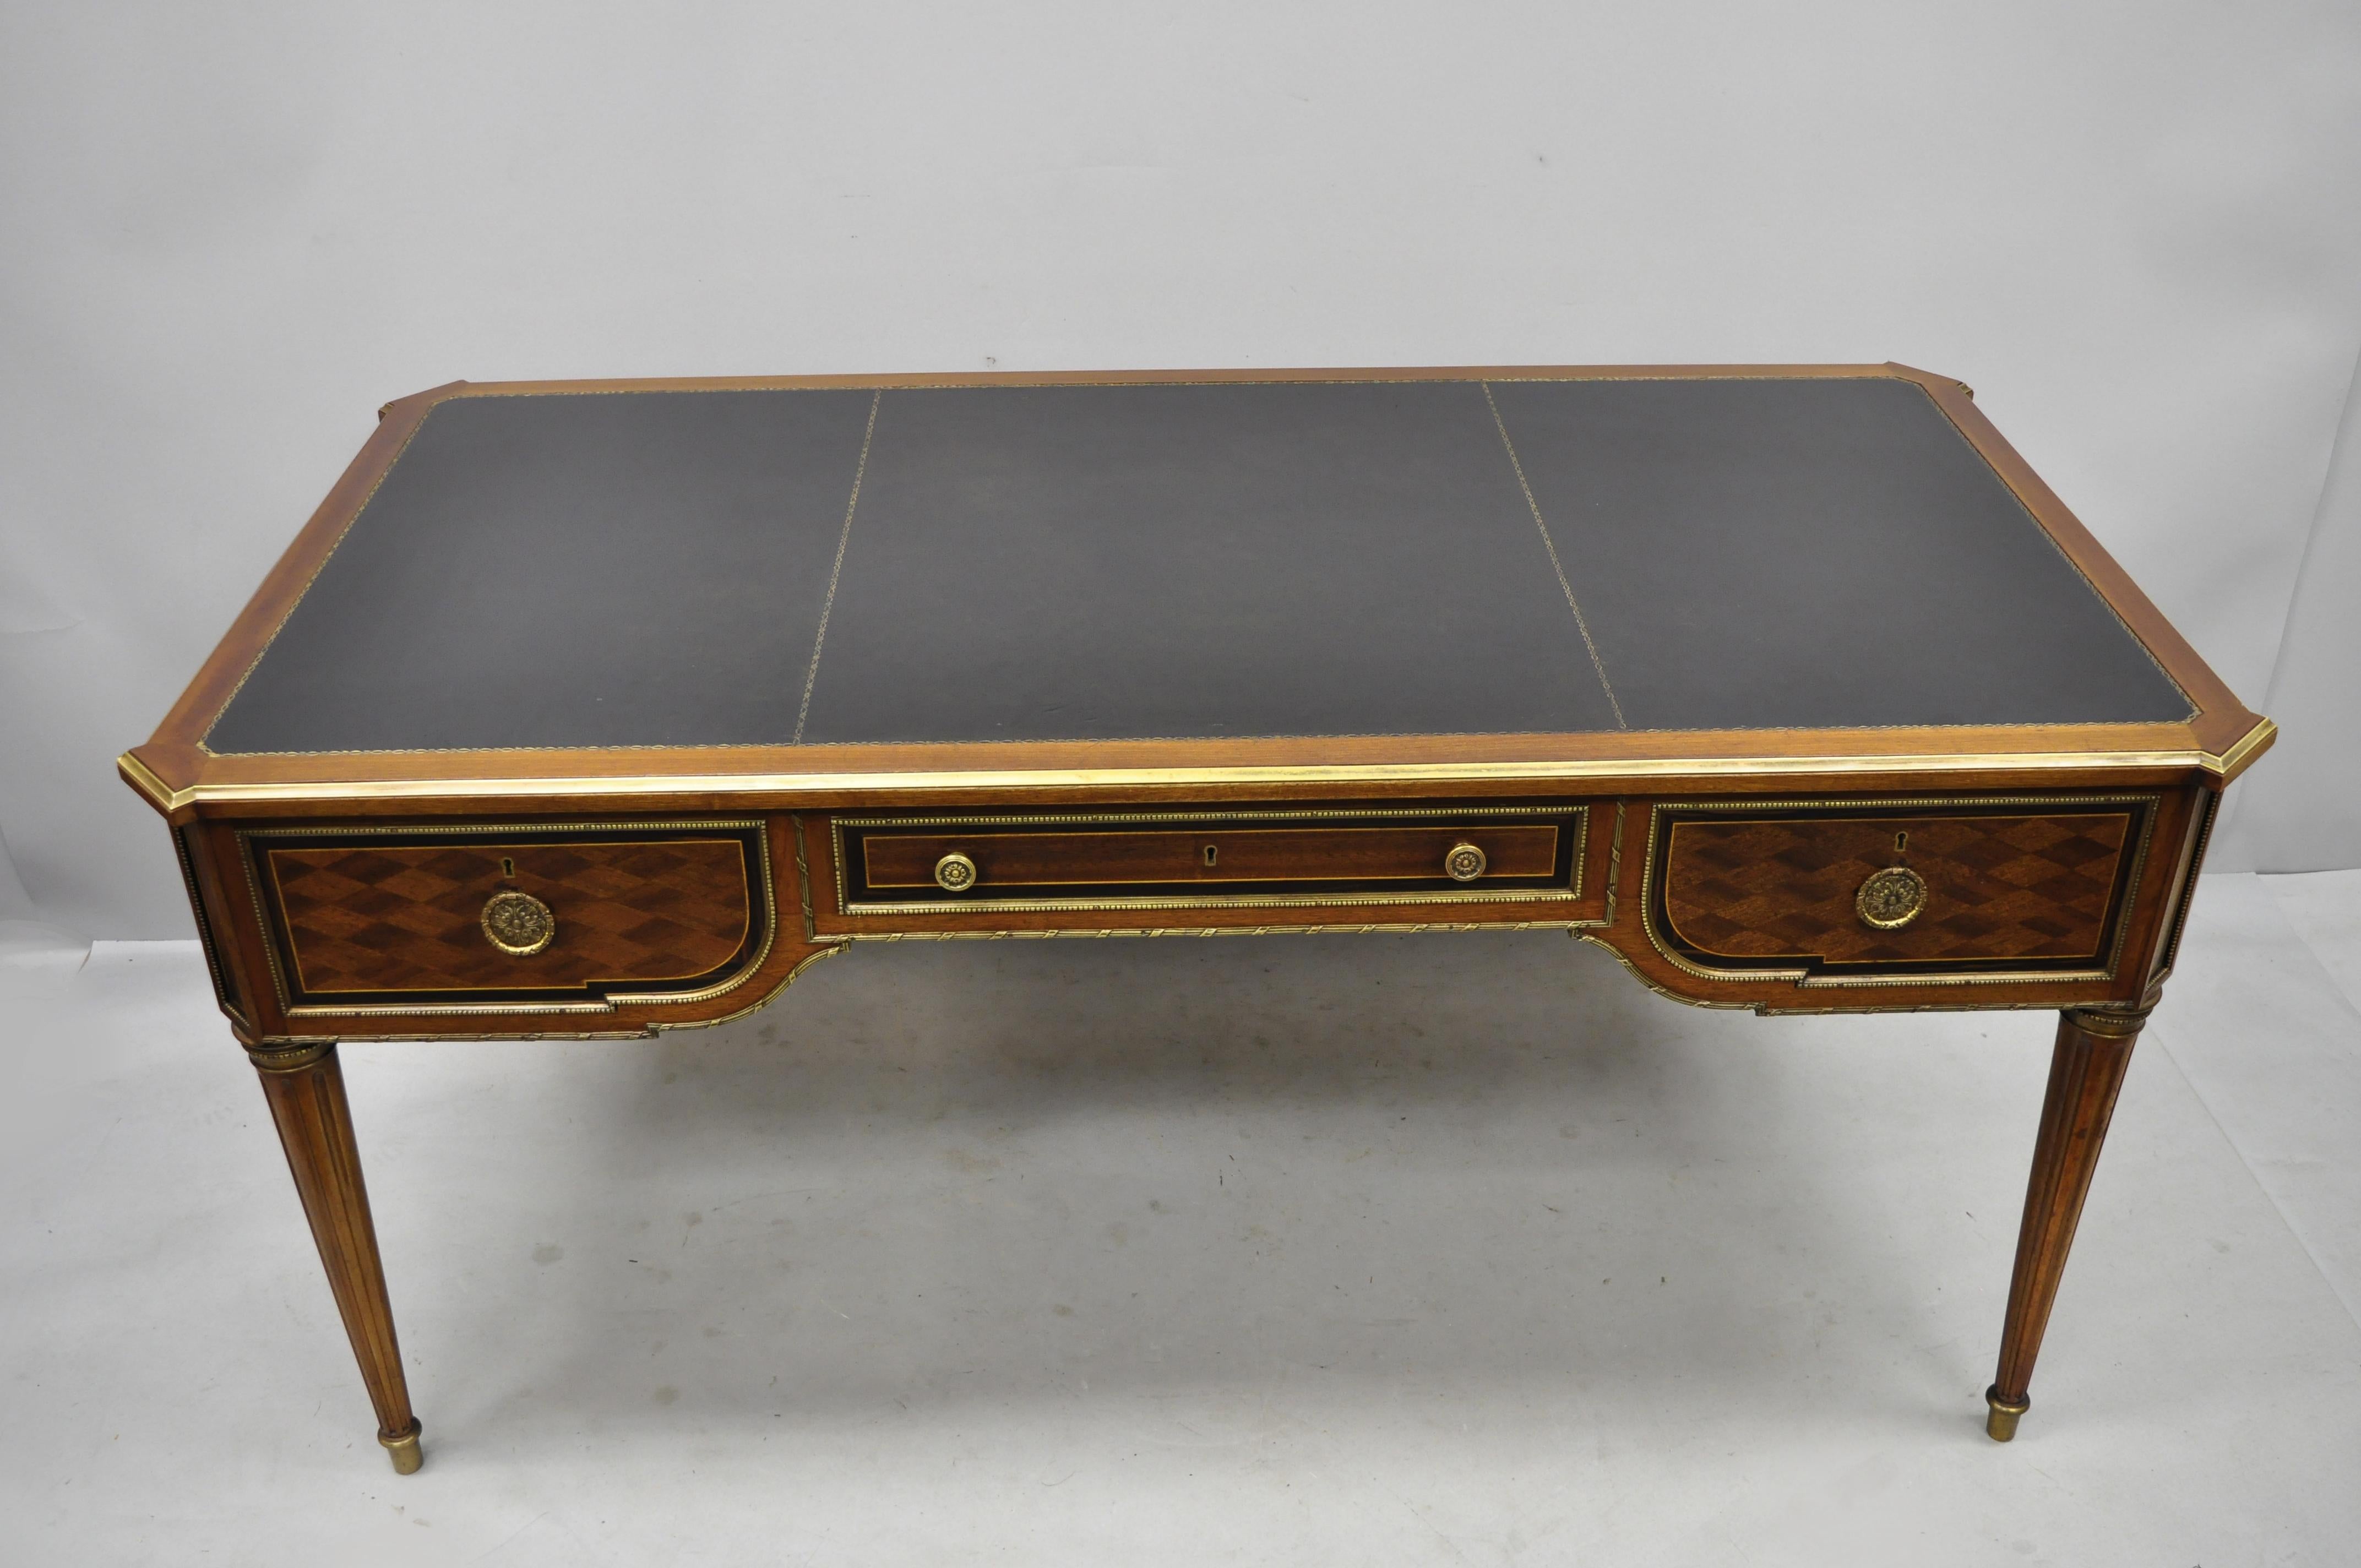 French Louis Style XVI black leather top bureau plat desk by Simon Loscertales Bona. Item features black tooled leather top, bronze ormolu, bronze edge, beautiful wood grain, finished back, original label, 3 dovetailed drawers, tapered legs, nice